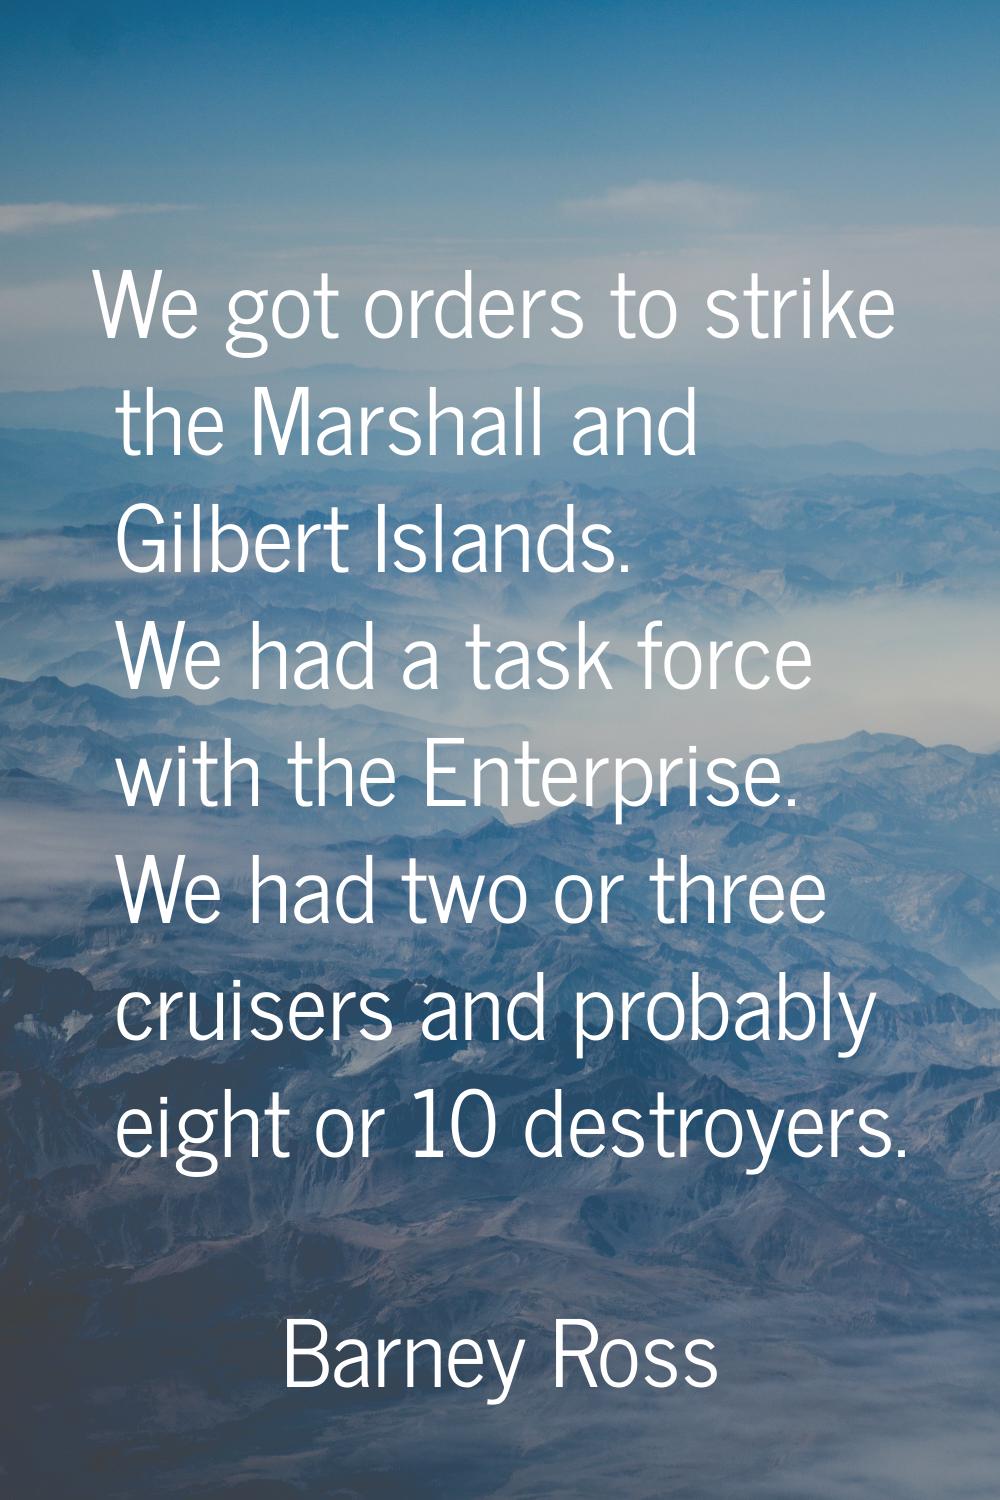 We got orders to strike the Marshall and Gilbert Islands. We had a task force with the Enterprise. 